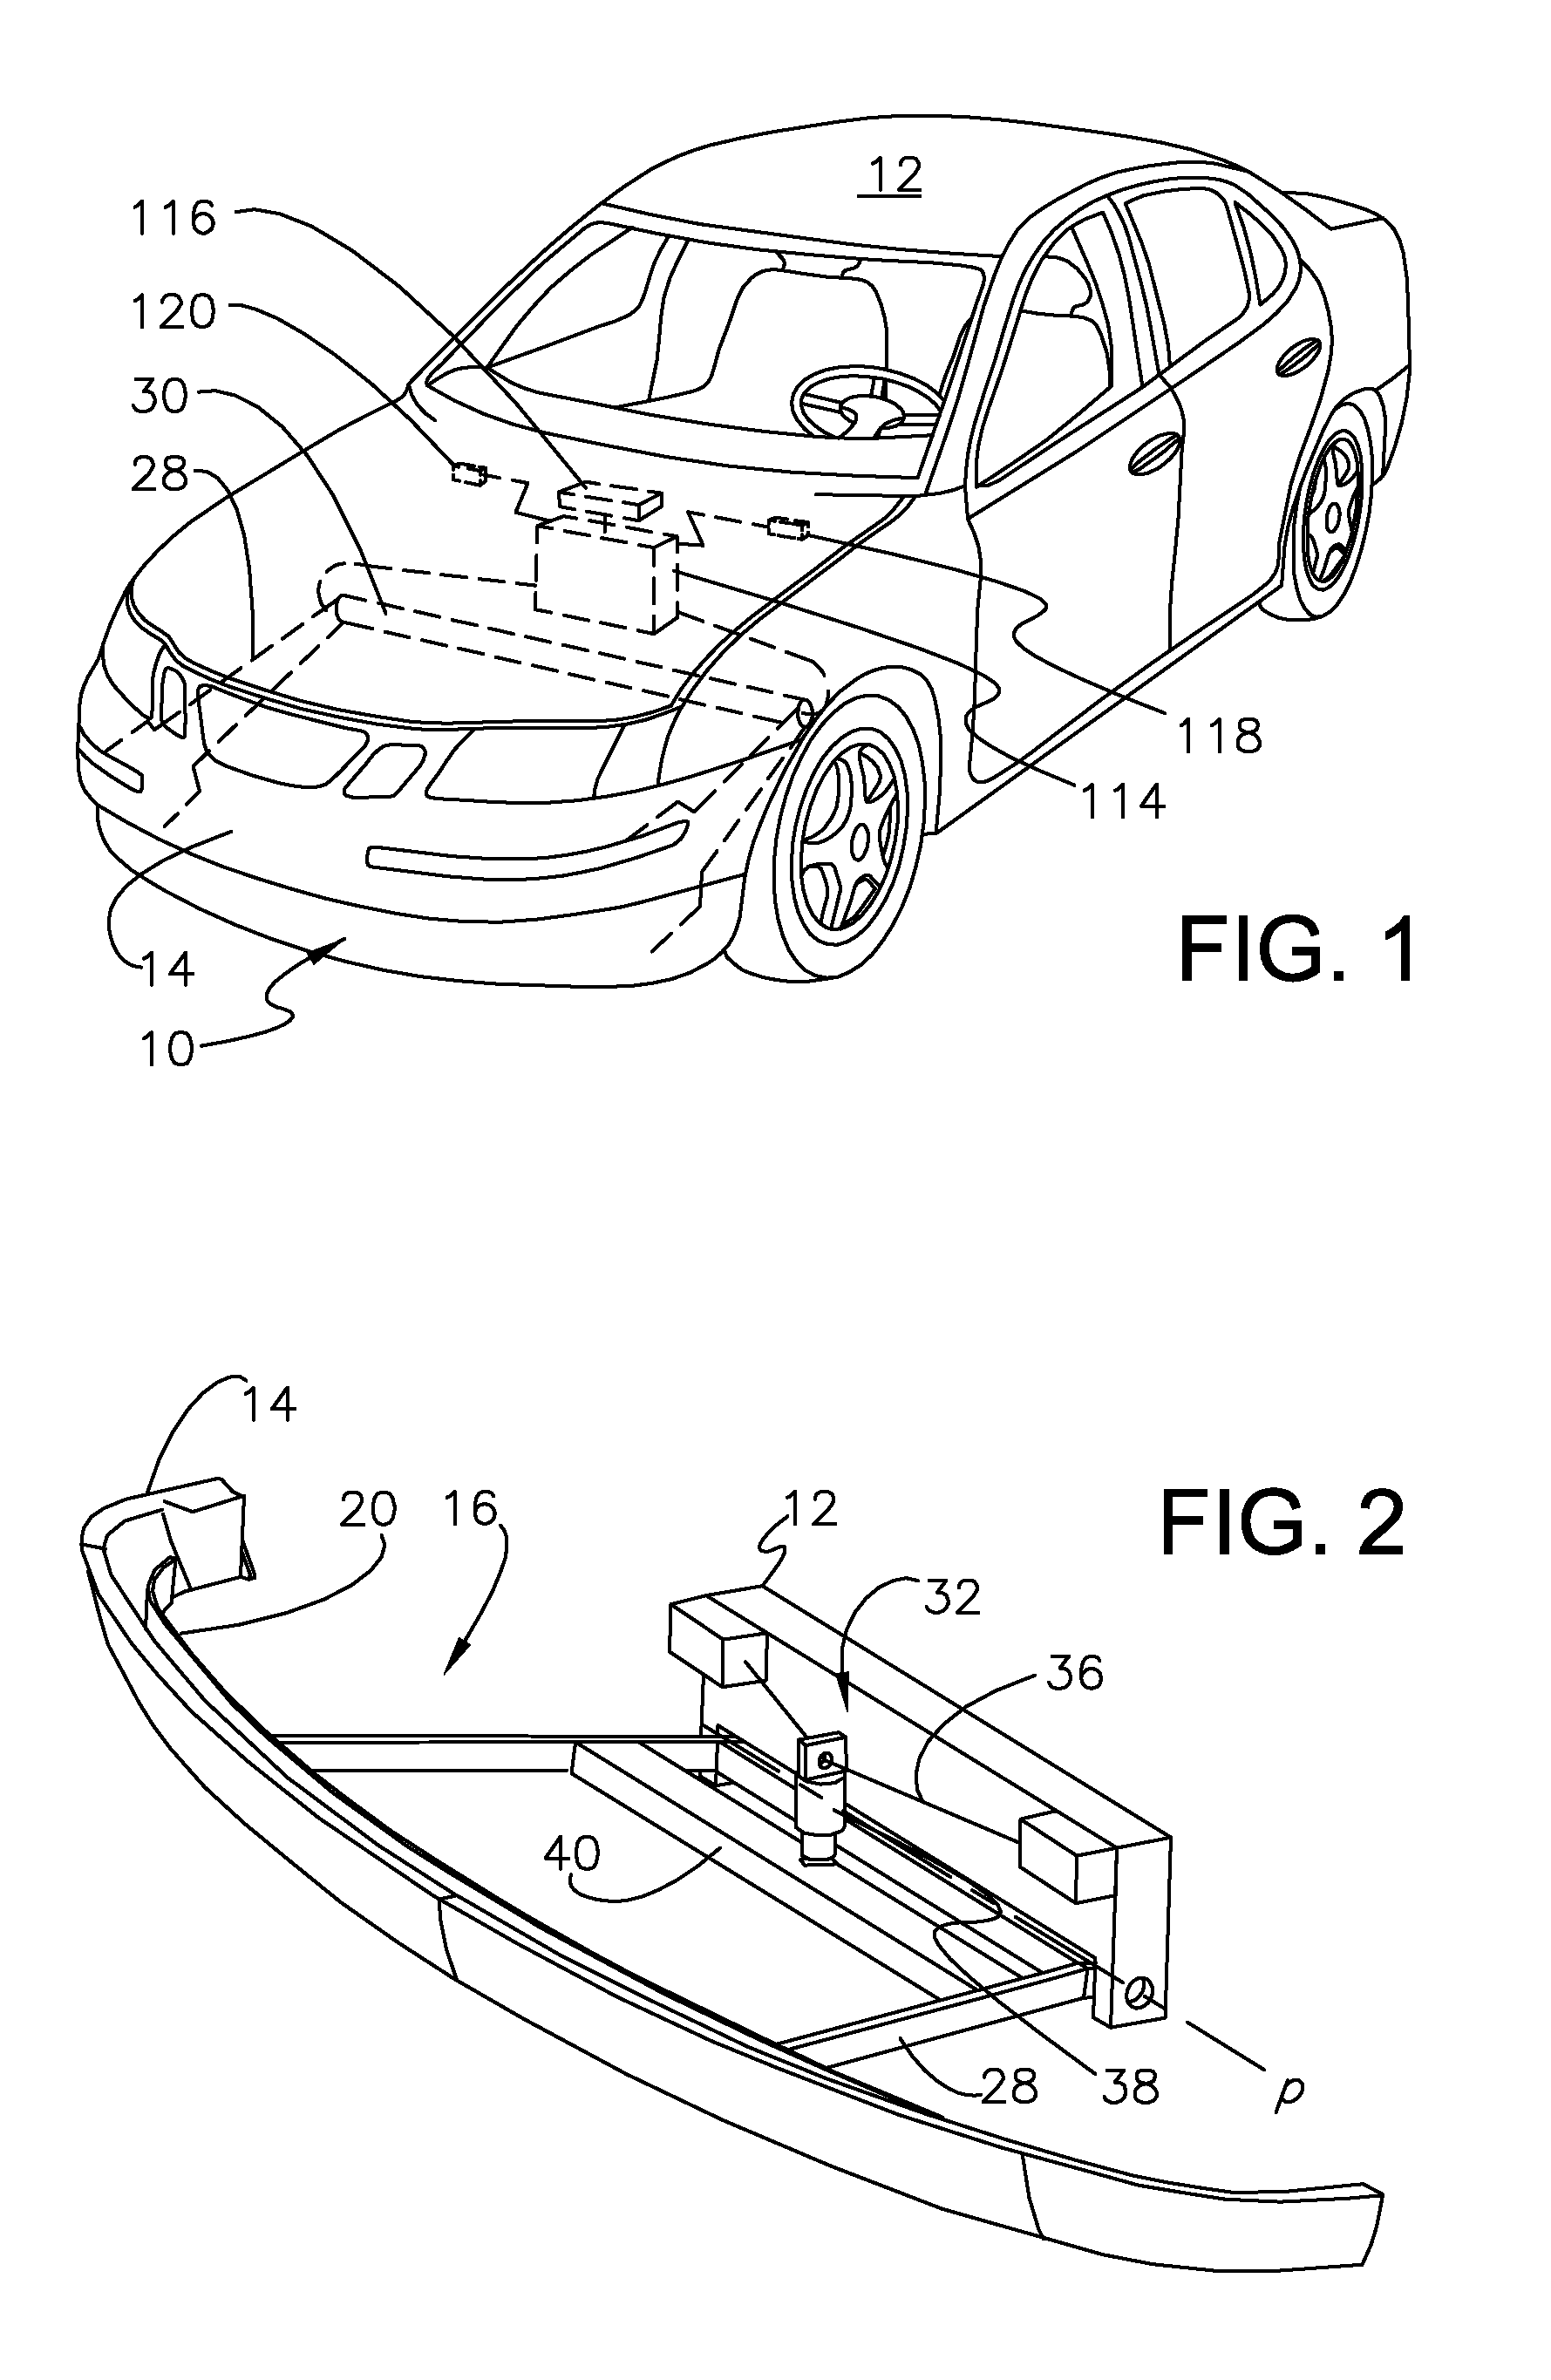 Pivotally deployable air dam utilizing active material actuation